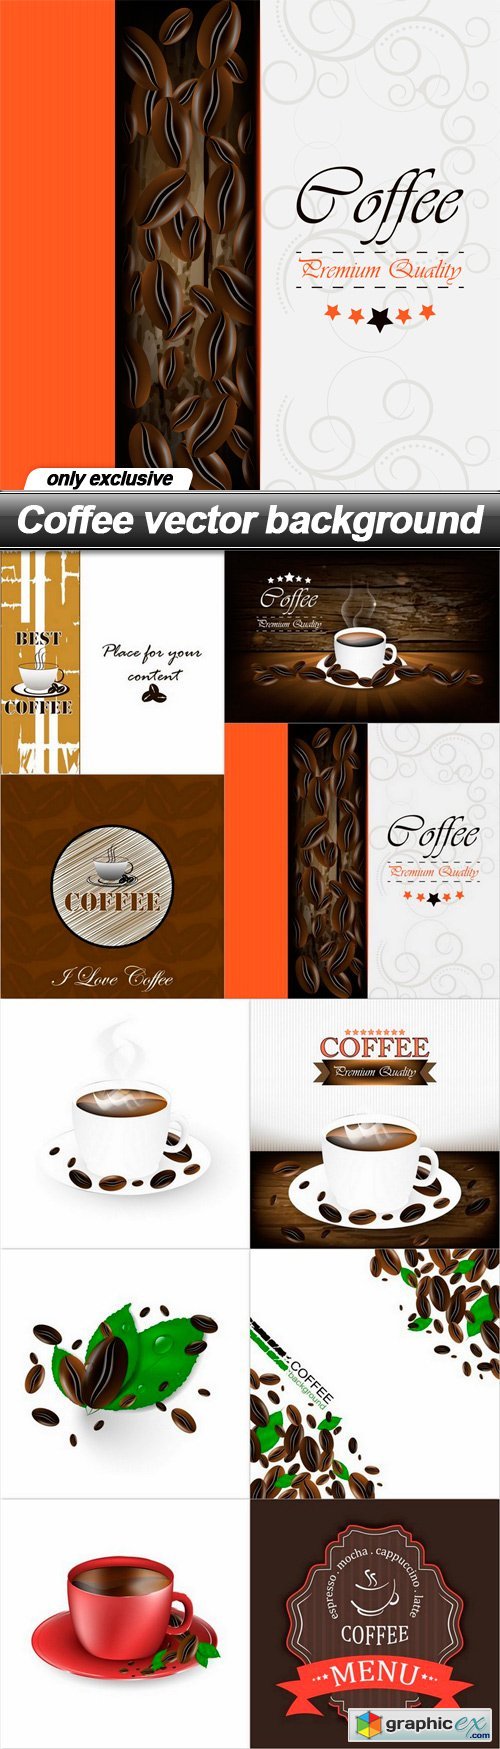 Coffee vector background - 10 EPS